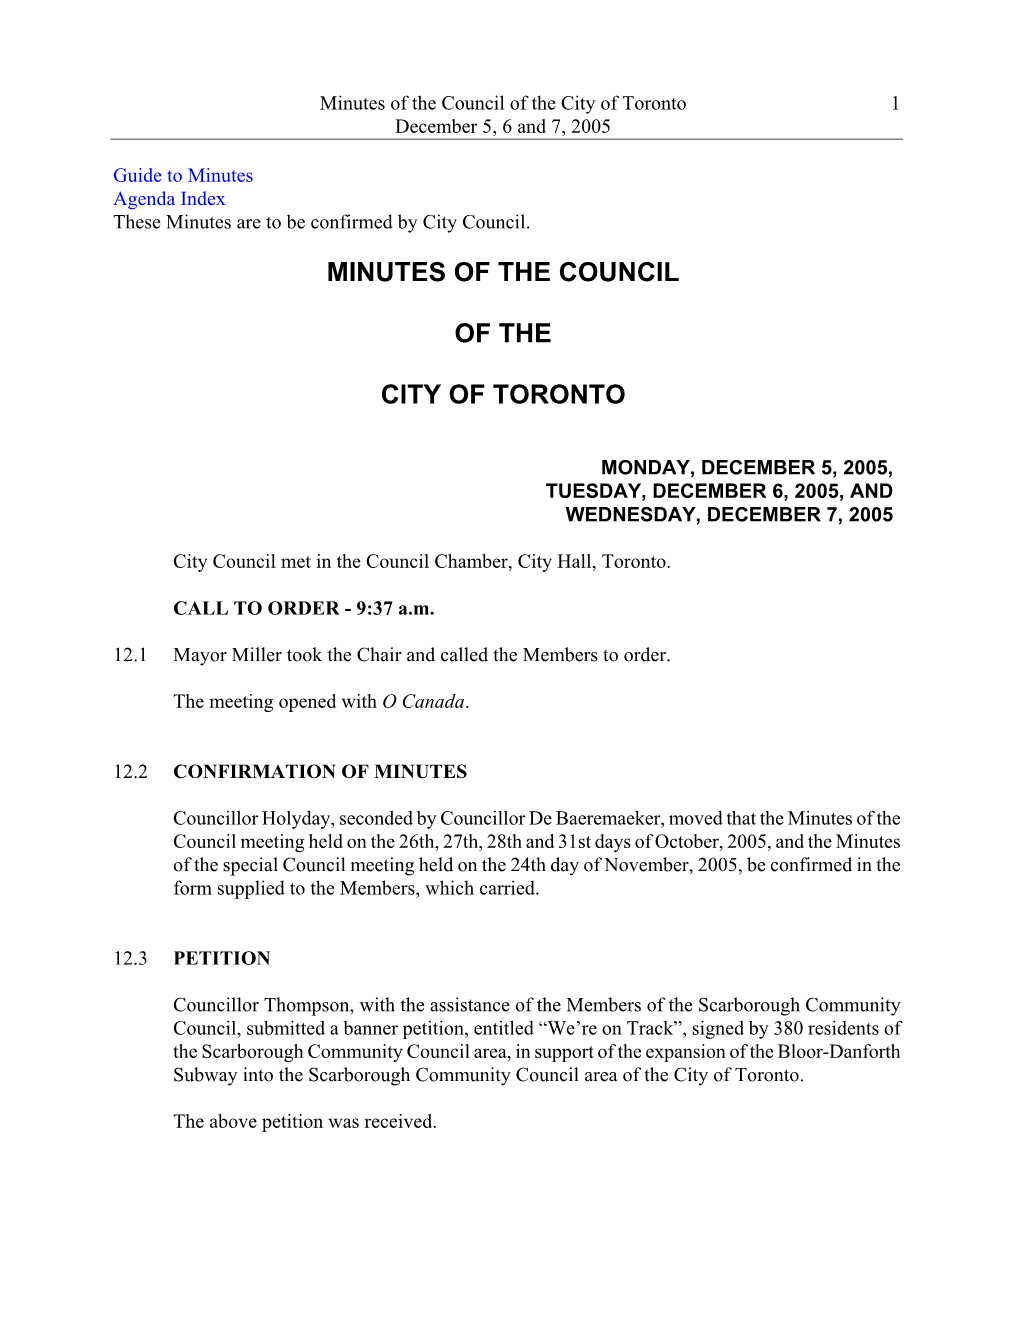 Minutes of the Council of the City of Toronto 1 December 5, 6 and 7, 2005